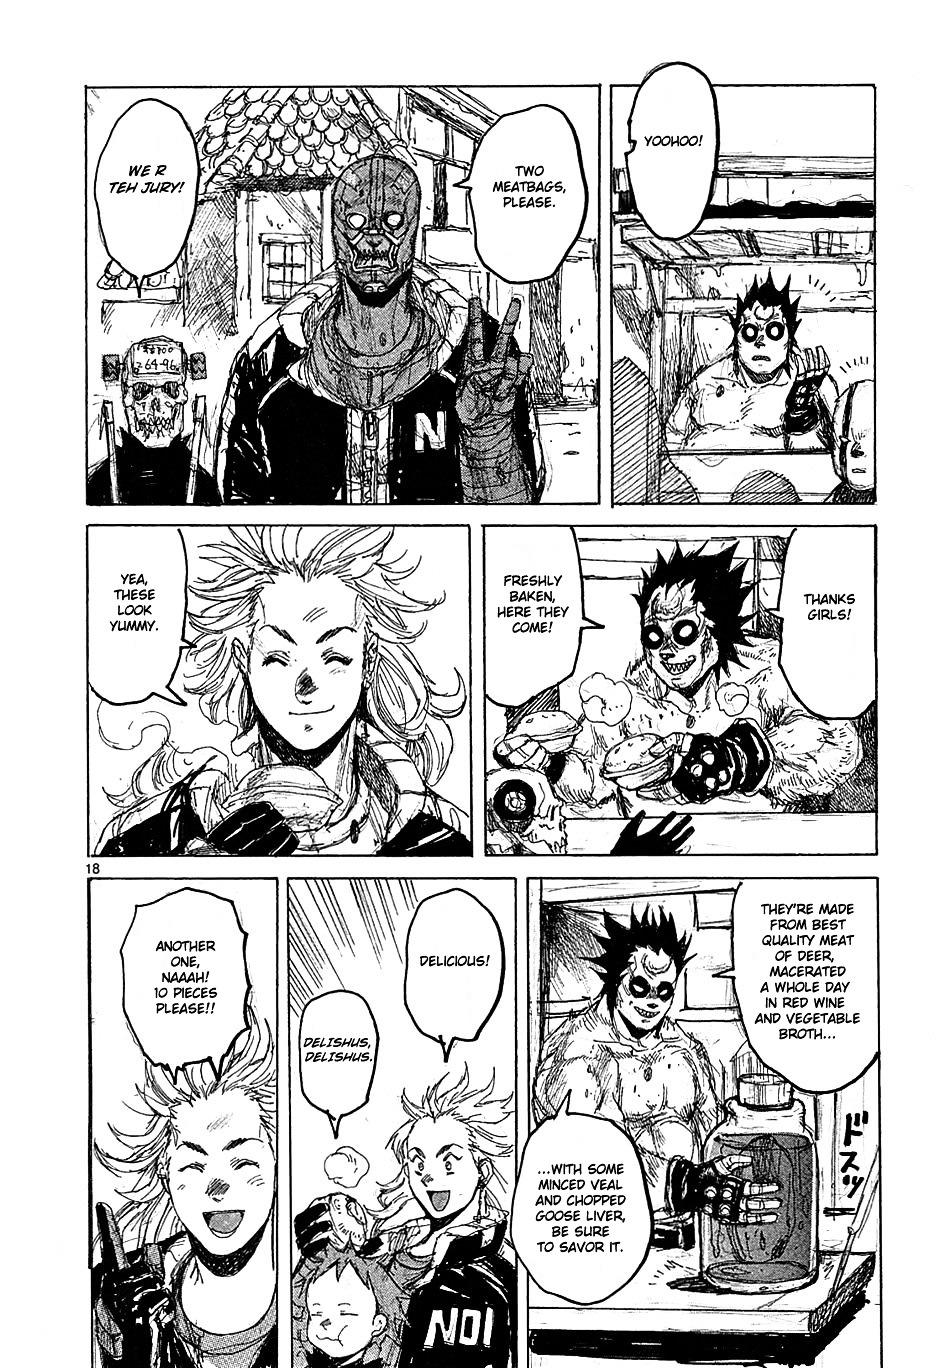 Dorohedoro Chapter 38 : Meatbags Free For All page 18 - Mangakakalot